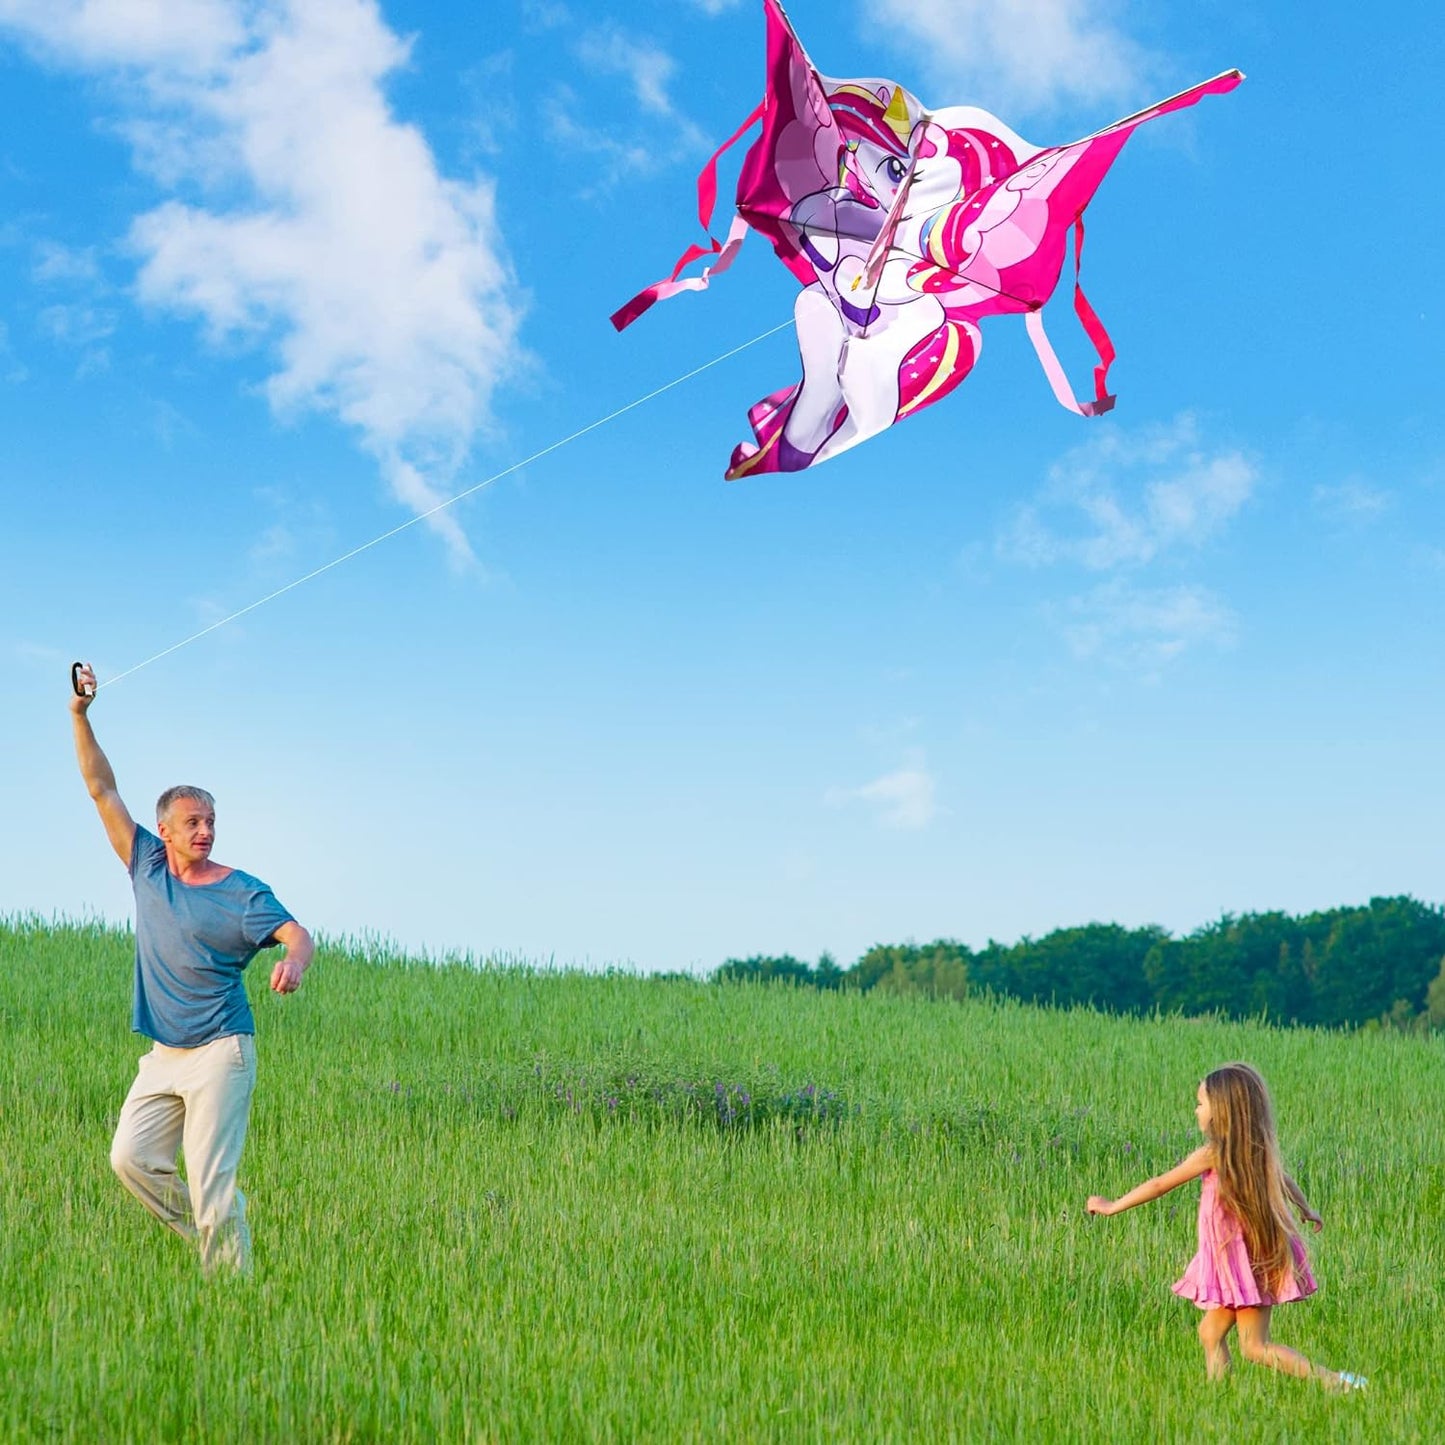 43.3'' Giant Unicorn Kite Easy to Fly Huge Kites for Kids and Adults with 262.5 Ft Kite String, Large Beach Kite for Outdoor Games and Activities